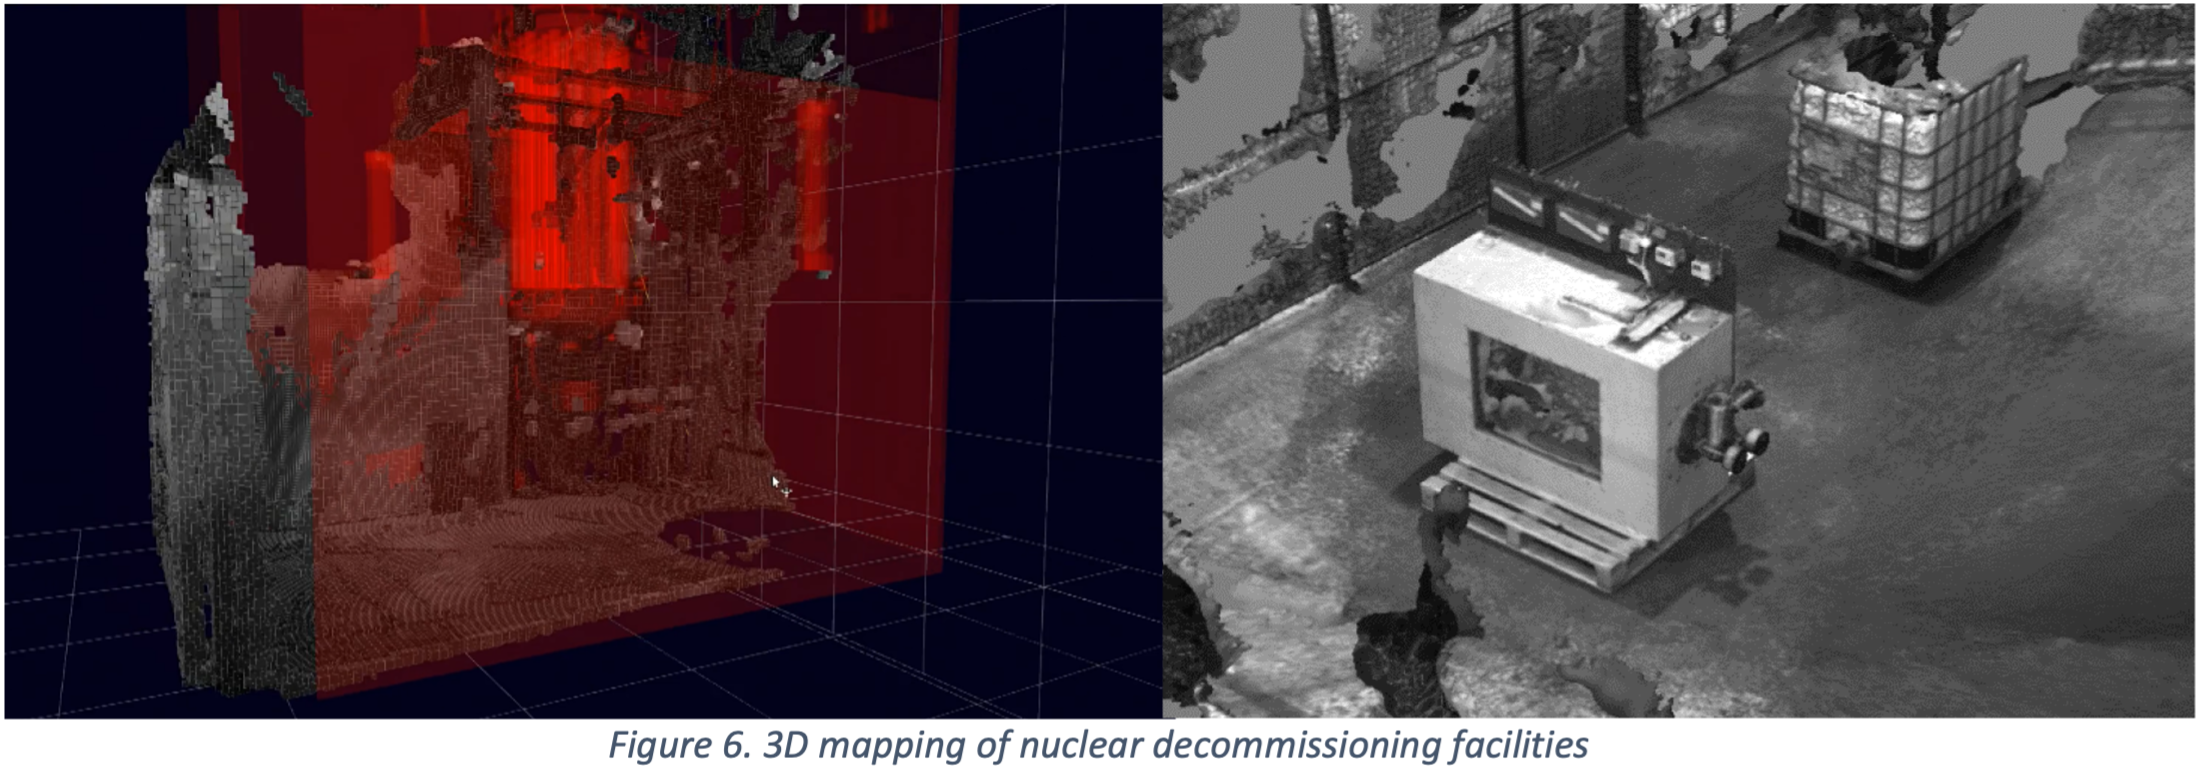 3D image of nuclear decommissioning facilities